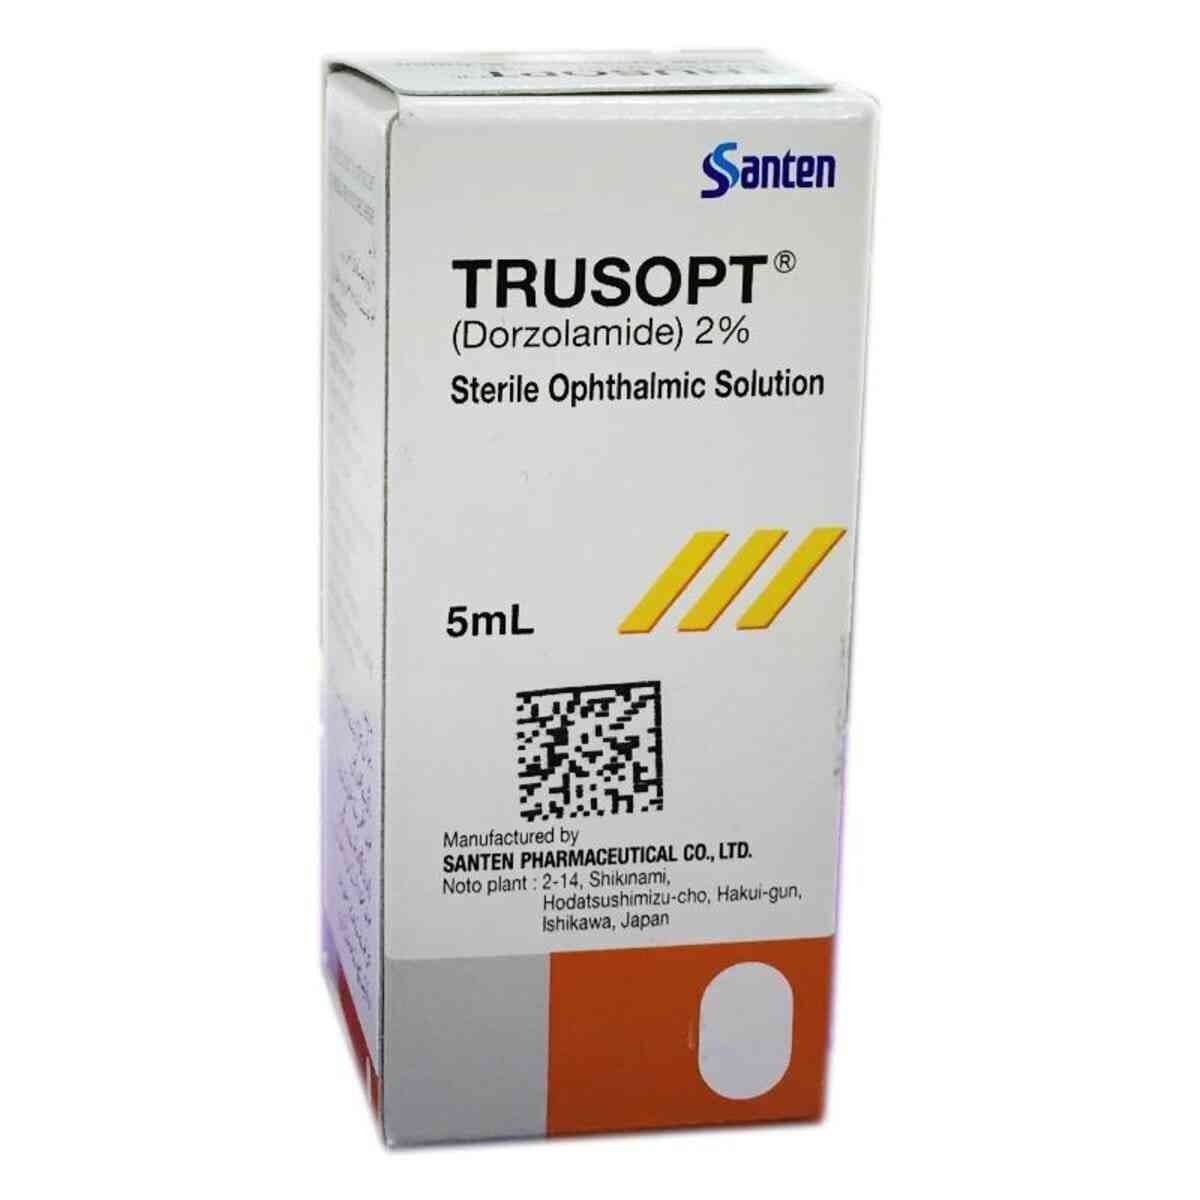 Trusopt 2% Ophthalmic Solution 5ml (Dorzolamide Hydrochloride)